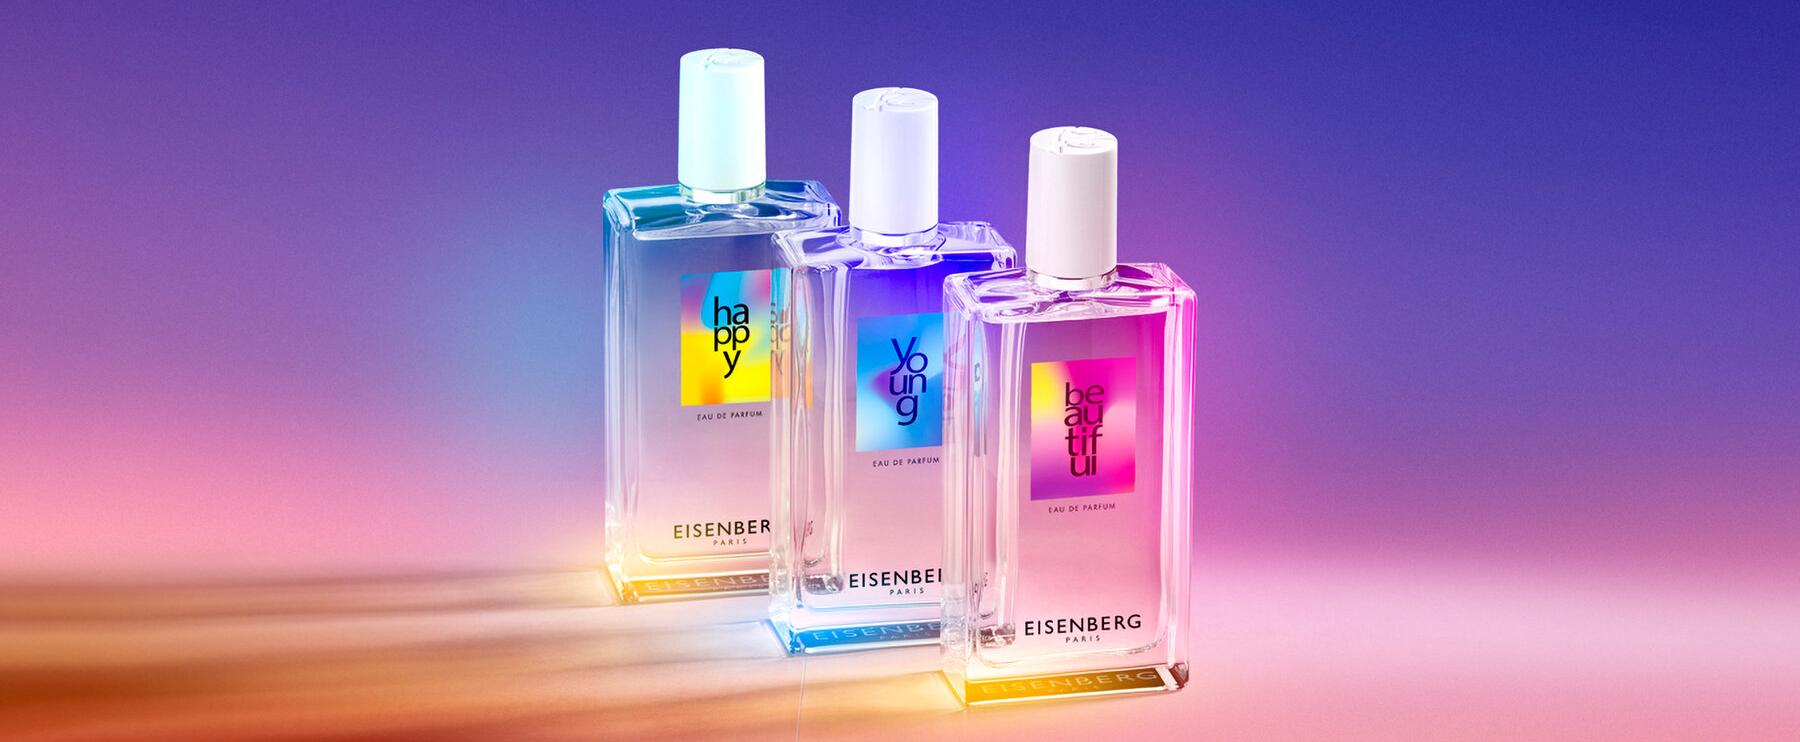 "Happiness La Collection" - New line of feel-good fragrances from Eisenberg